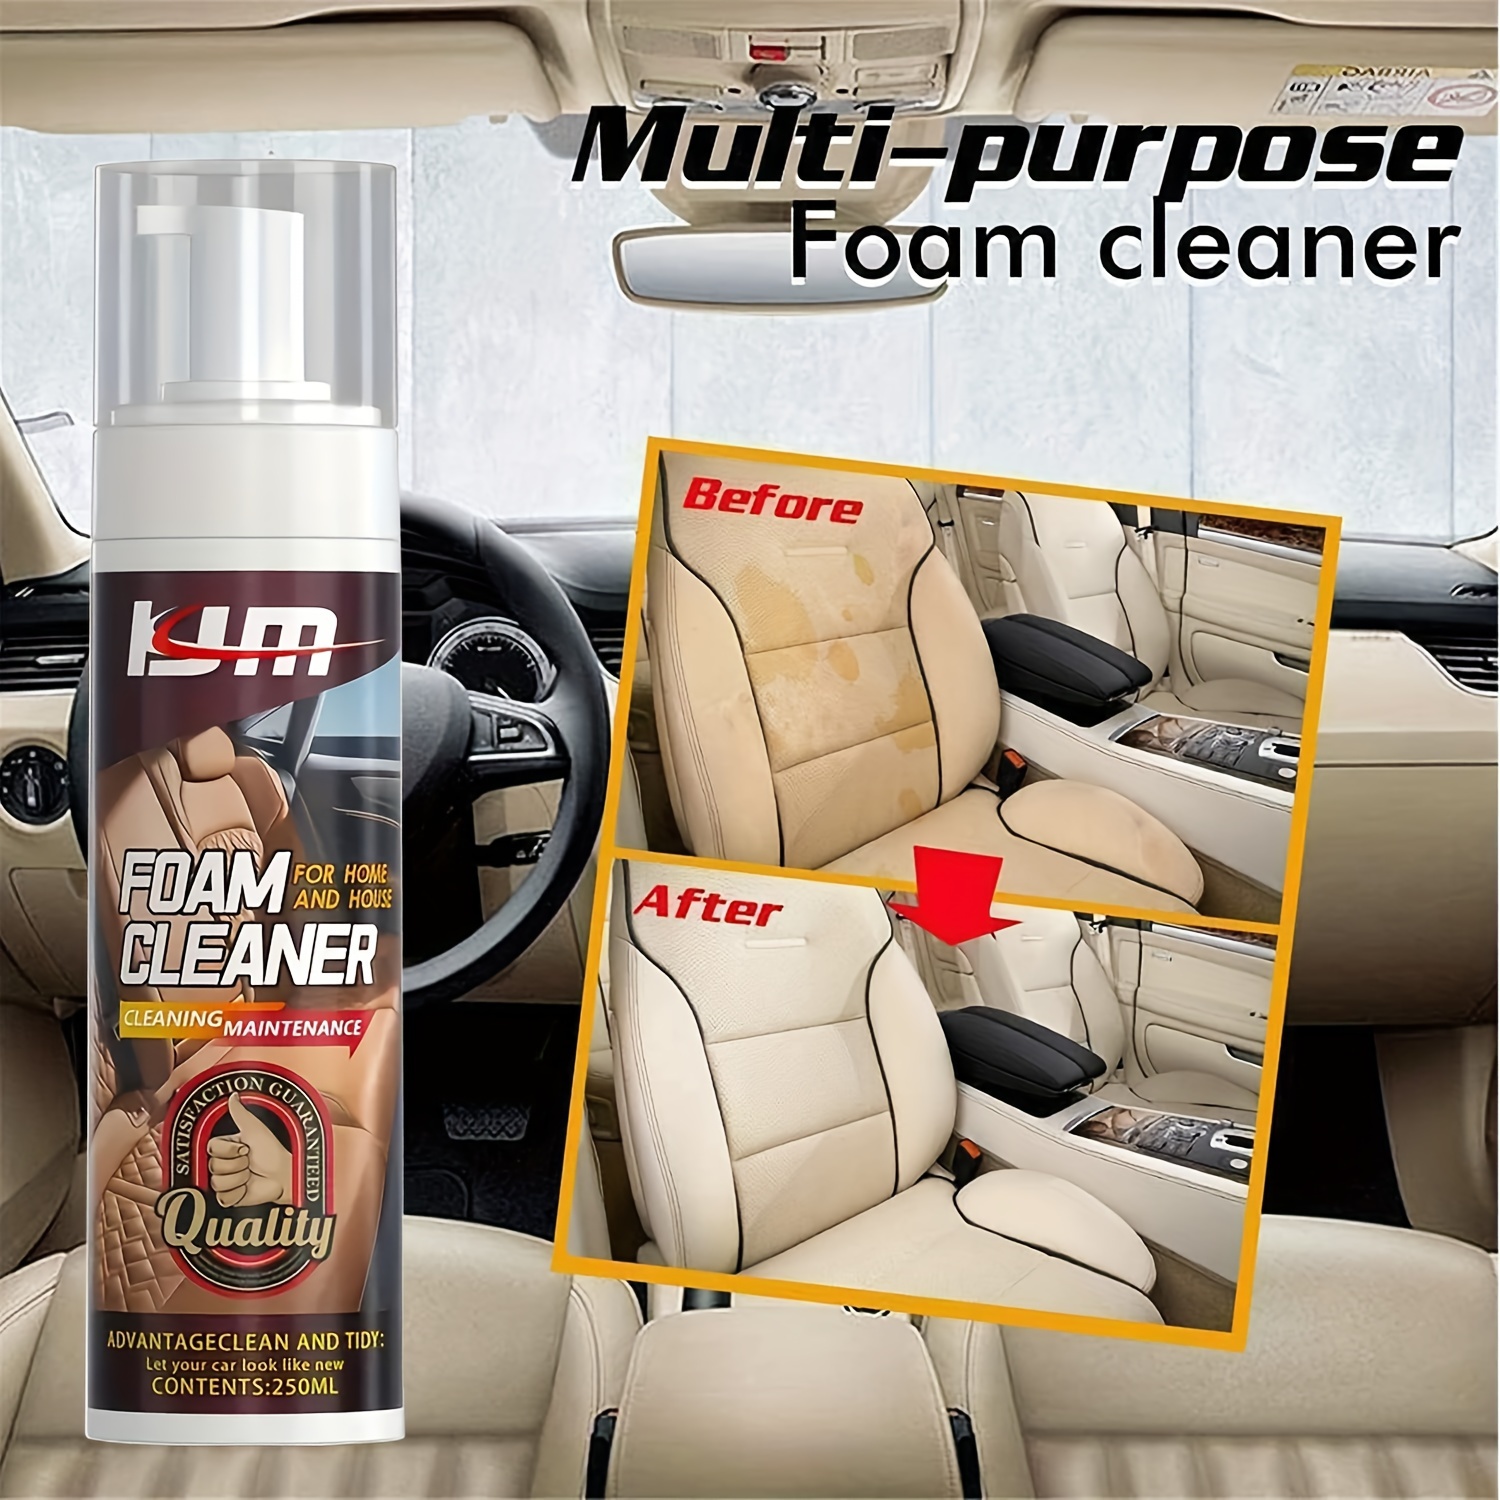 Ovzne Super Cleaner Effective Car Interior Cleaner Leather Car Seat Cleaner  Stain Remover For Carpet, Upholstery, Fabric, Sofa Car Headliner Seat